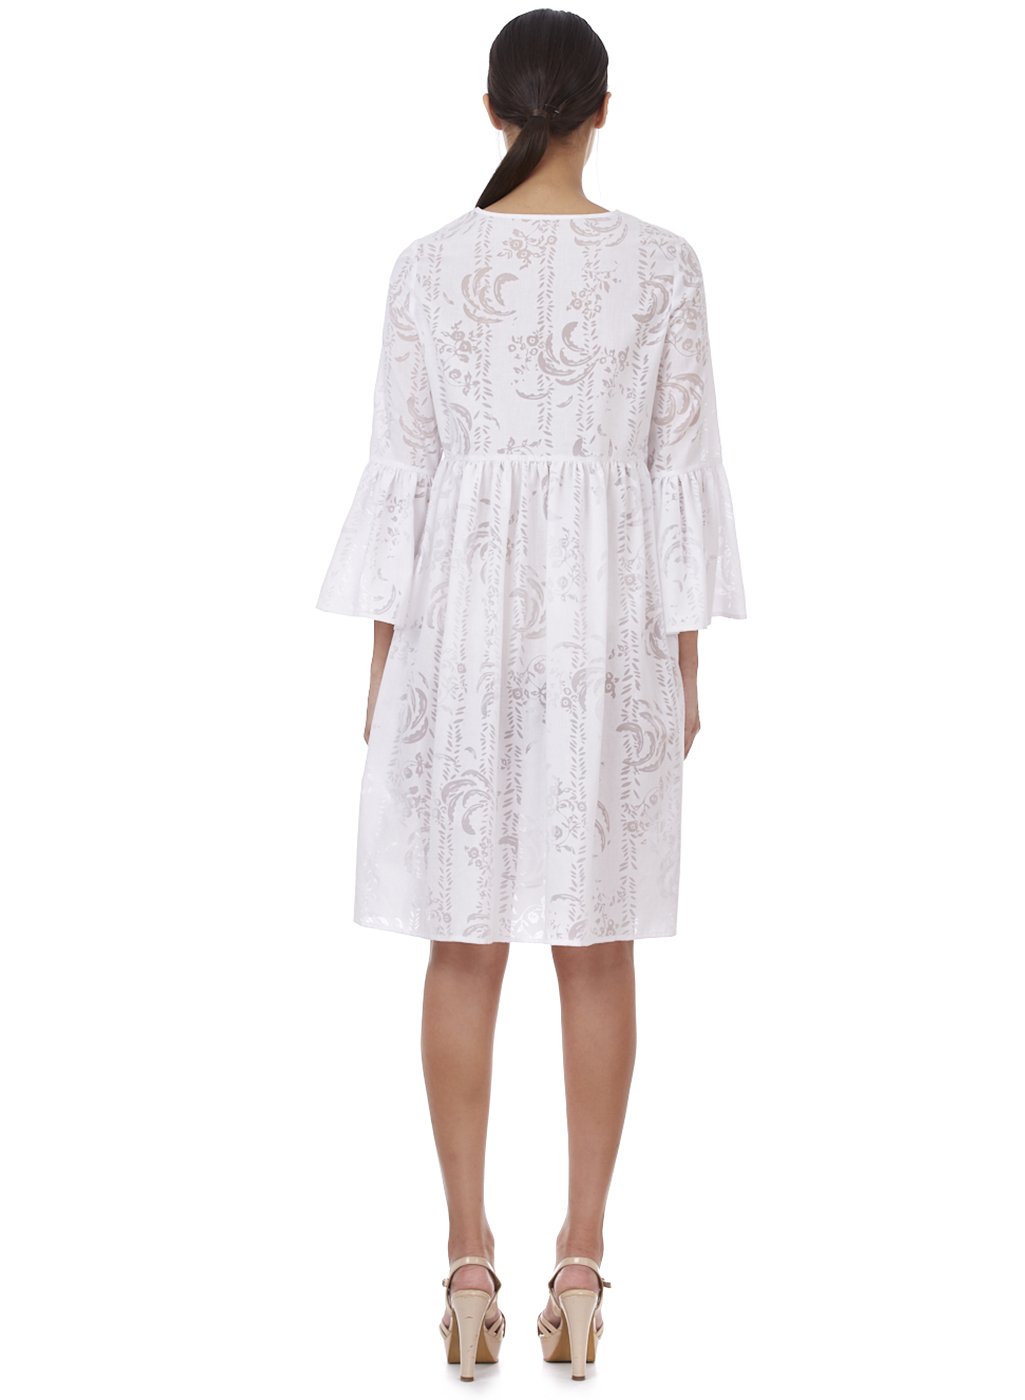 MAIA EMBROIDERED DRESS - Genes online store 2020